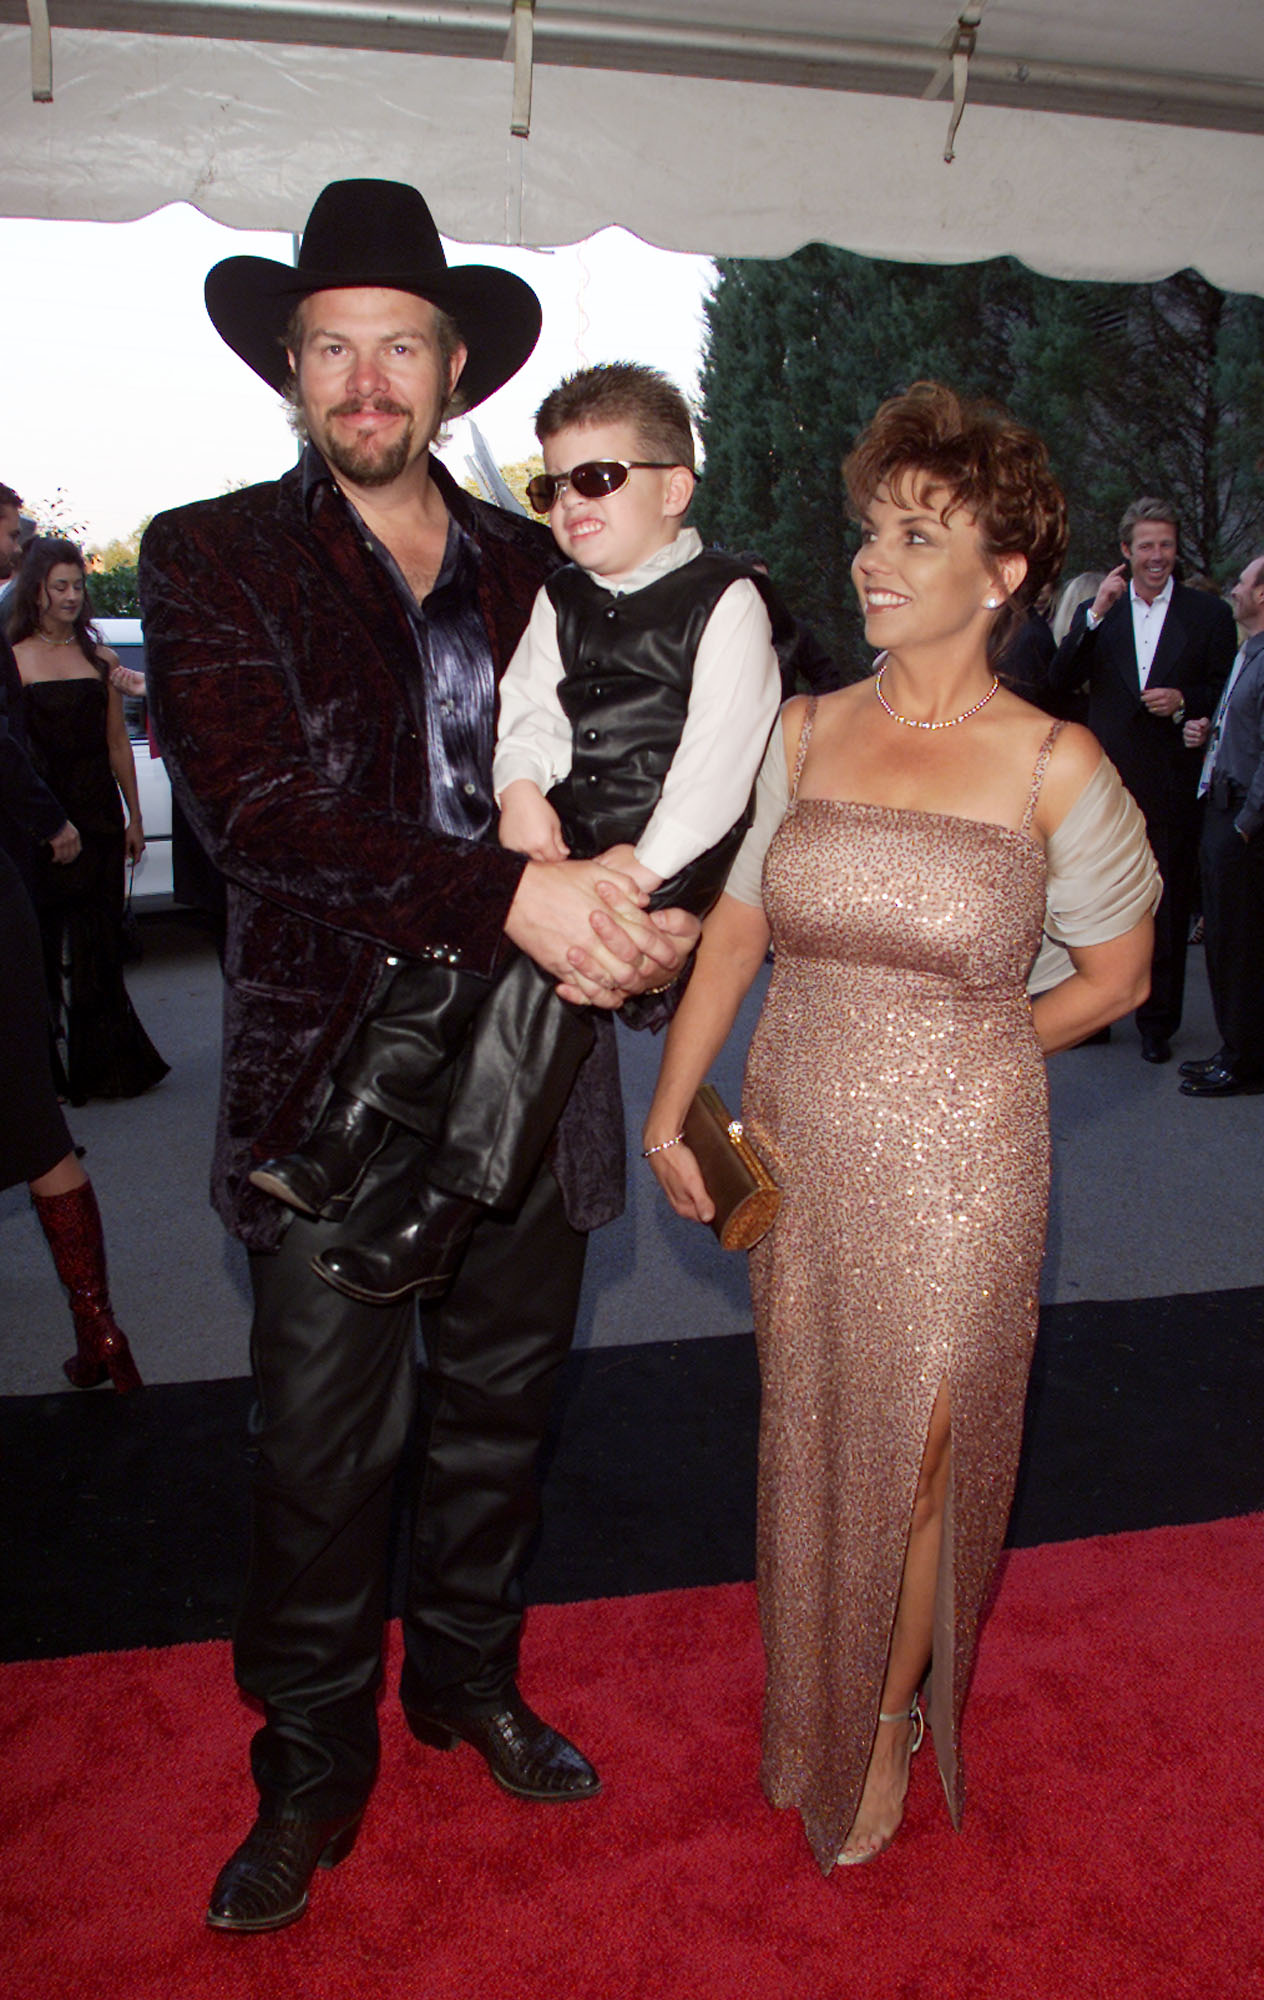 Toby Keith with wife Tricia and their son attend the 34th Annual CMA Awards on October 4, 2000 in Nashville, Tennessee | Source: Getty Images